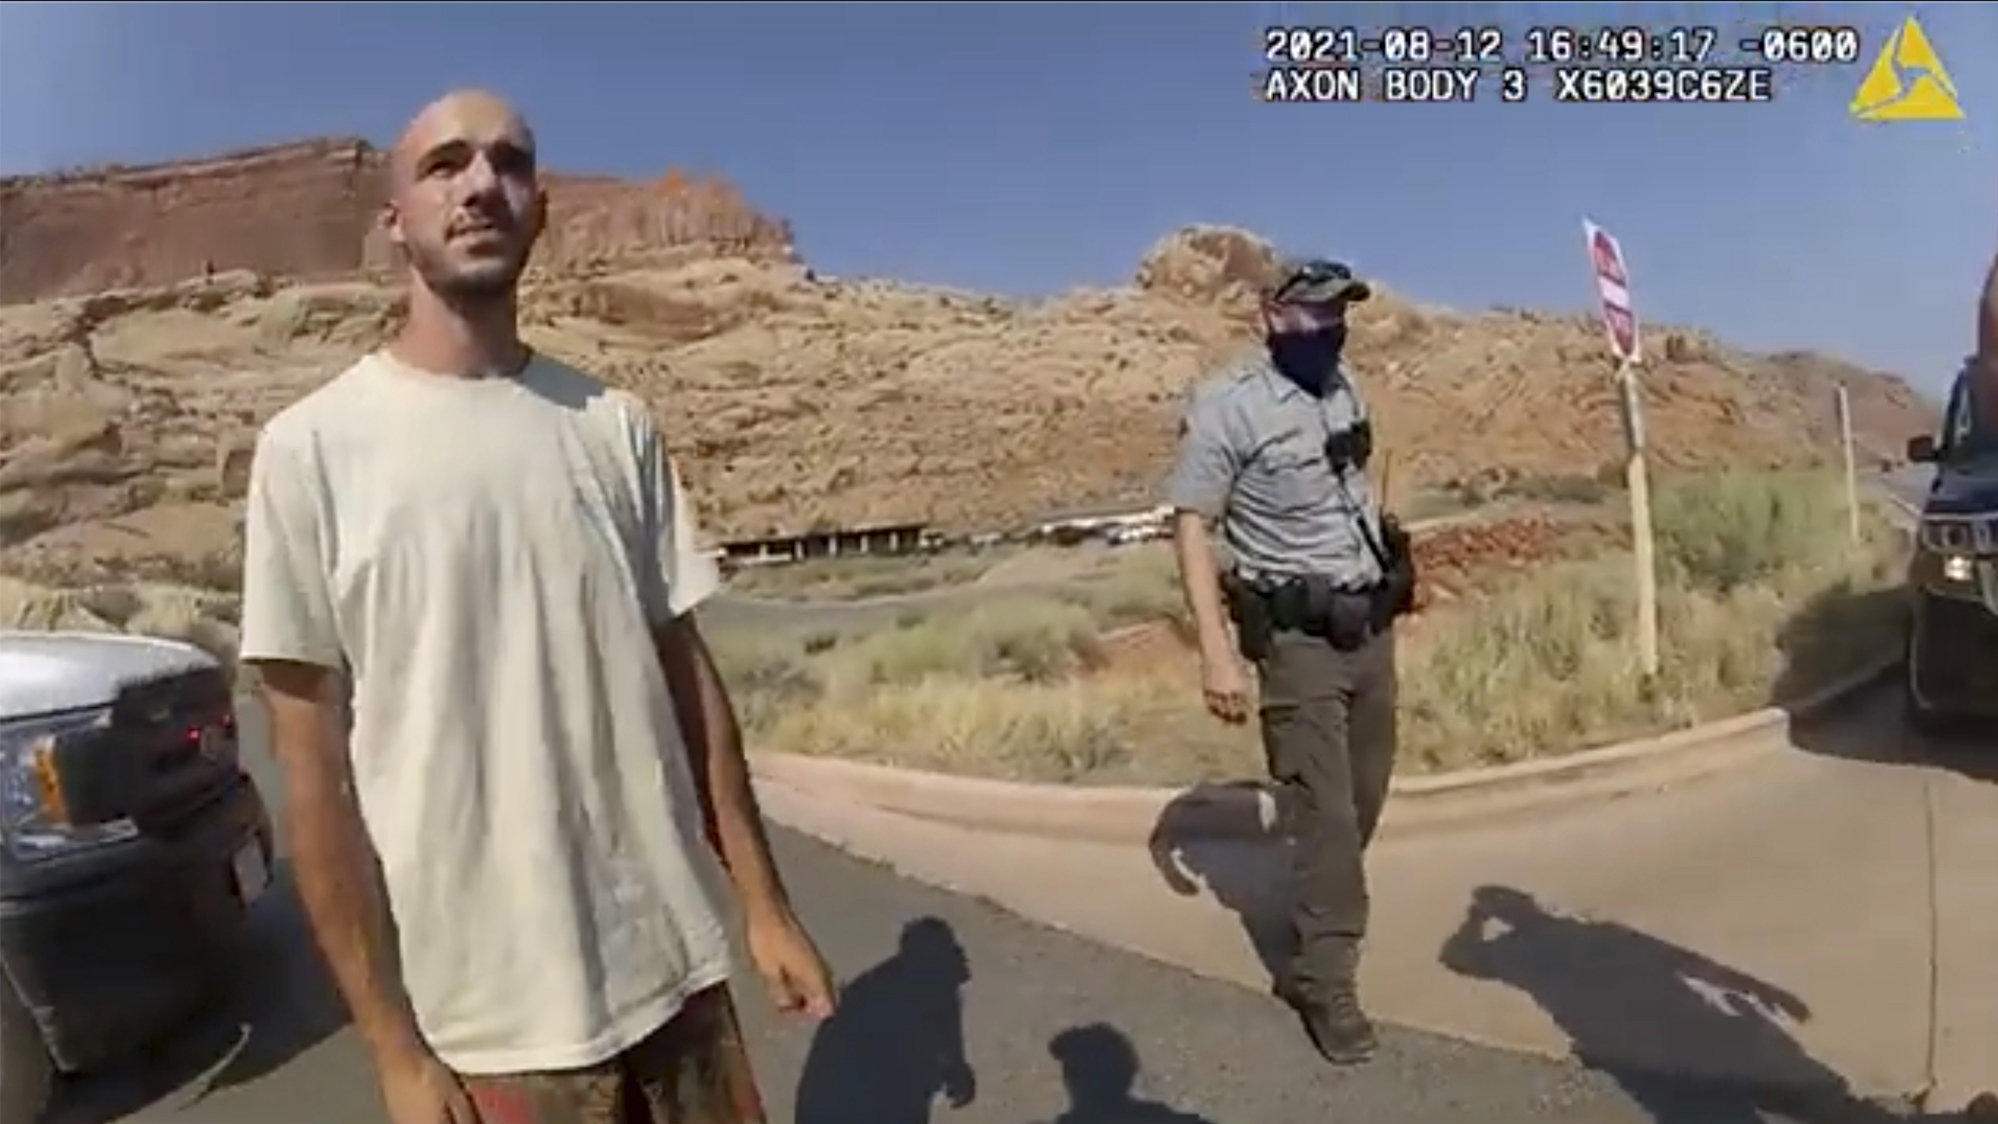 This police camera video provided by The Moab Police Department shows Brian Laundrie  talking to a police officer after police pulled over the van he was traveling in with his girlfriend, Gabrielle â€œGabbyâ€ Petito, near the entrance to Arches Nati